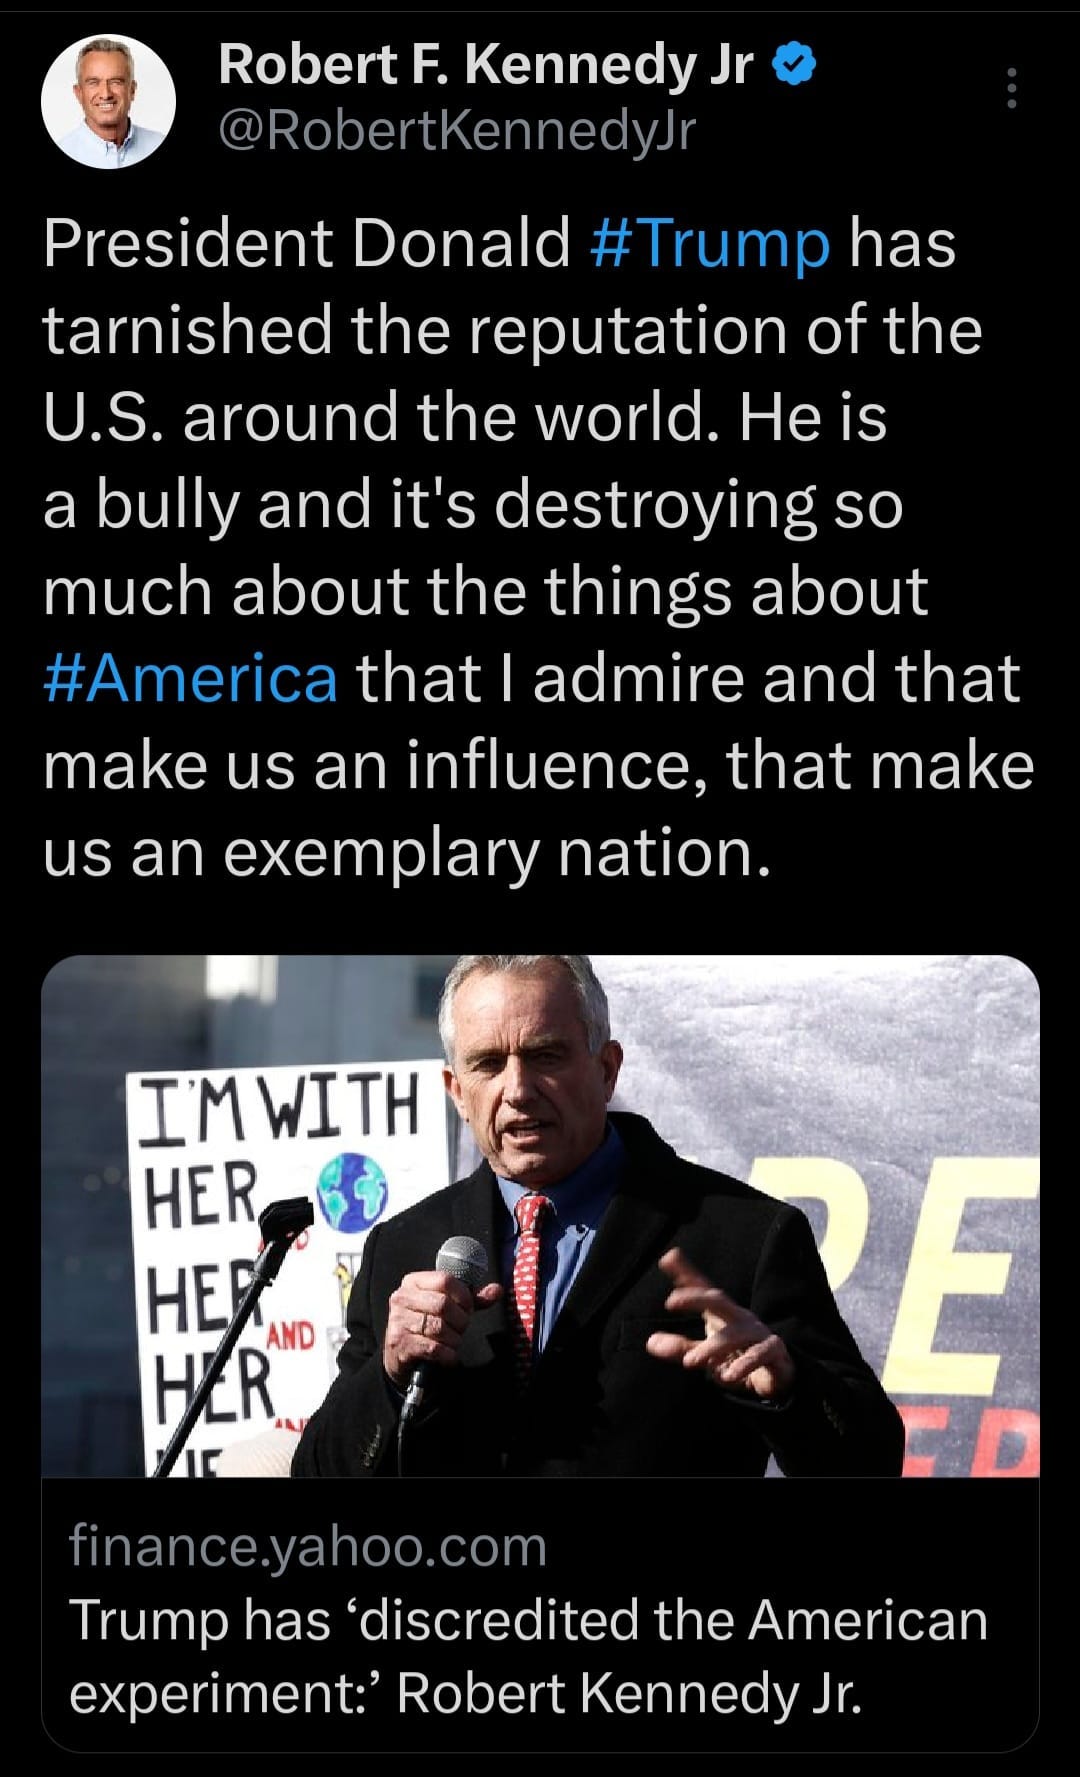 May be an image of 2 people and text that says 'Robert Kennedy Jr @RobertKennedyJr President Donald #Trump has tarnished the reputation of the U.S. around the world. He is a bully and it's destroying so much about the things about #America that| admire and that make us an influence, that make us an exemplary nation. IMWITH HER HEP AND HER RE finance.yahoo.com Trump has 'discredited the American experiment: Robert Kennedy Jr.'